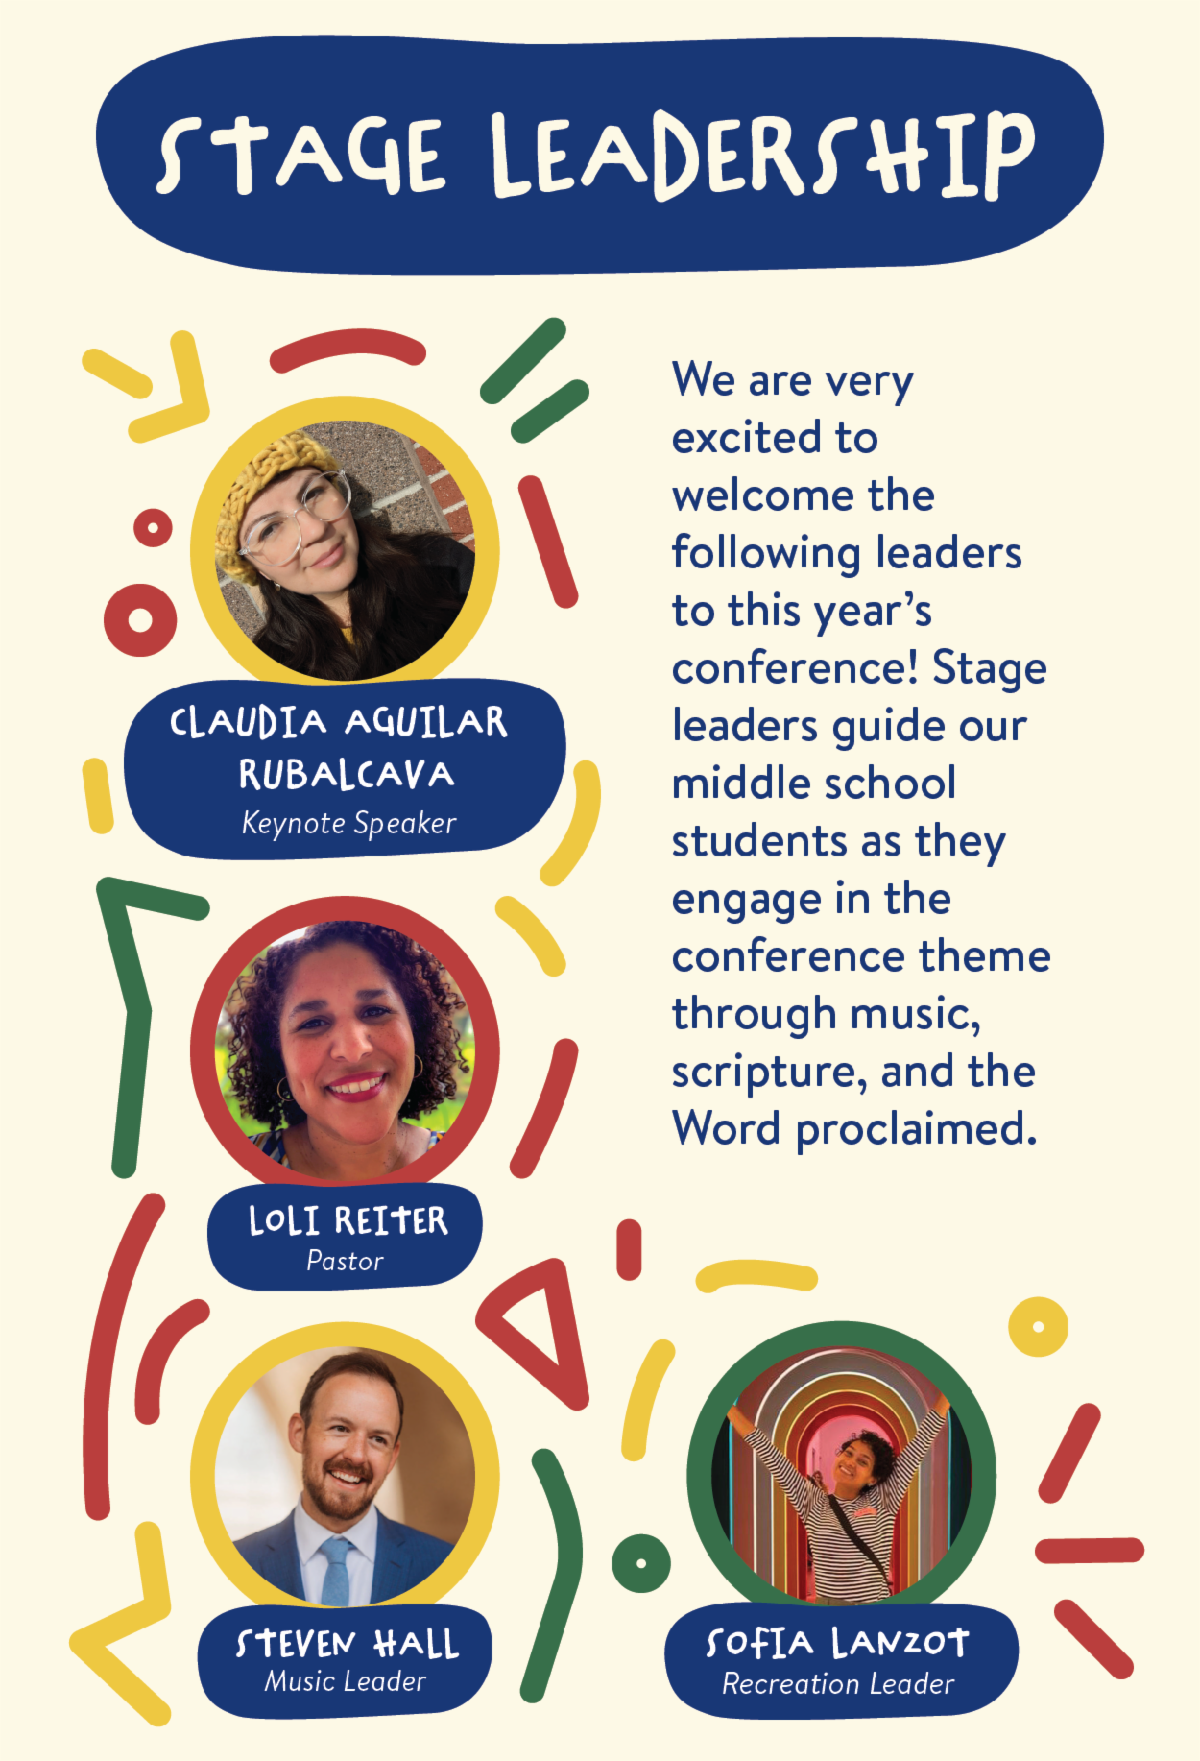 Stage Leadership - We are very excited to welcome the following leaders to this year’s conference: Claudia Aguilar Rubalcava, Keynote Speaker, Loli Reiter, Pastor, Steven Hall, Music Leader, Sofia Lanzot, Recreation Leader. Stage leaders guide our middle school students as they engage in the conference theme through music, scripture, and the Word proclaimed. 